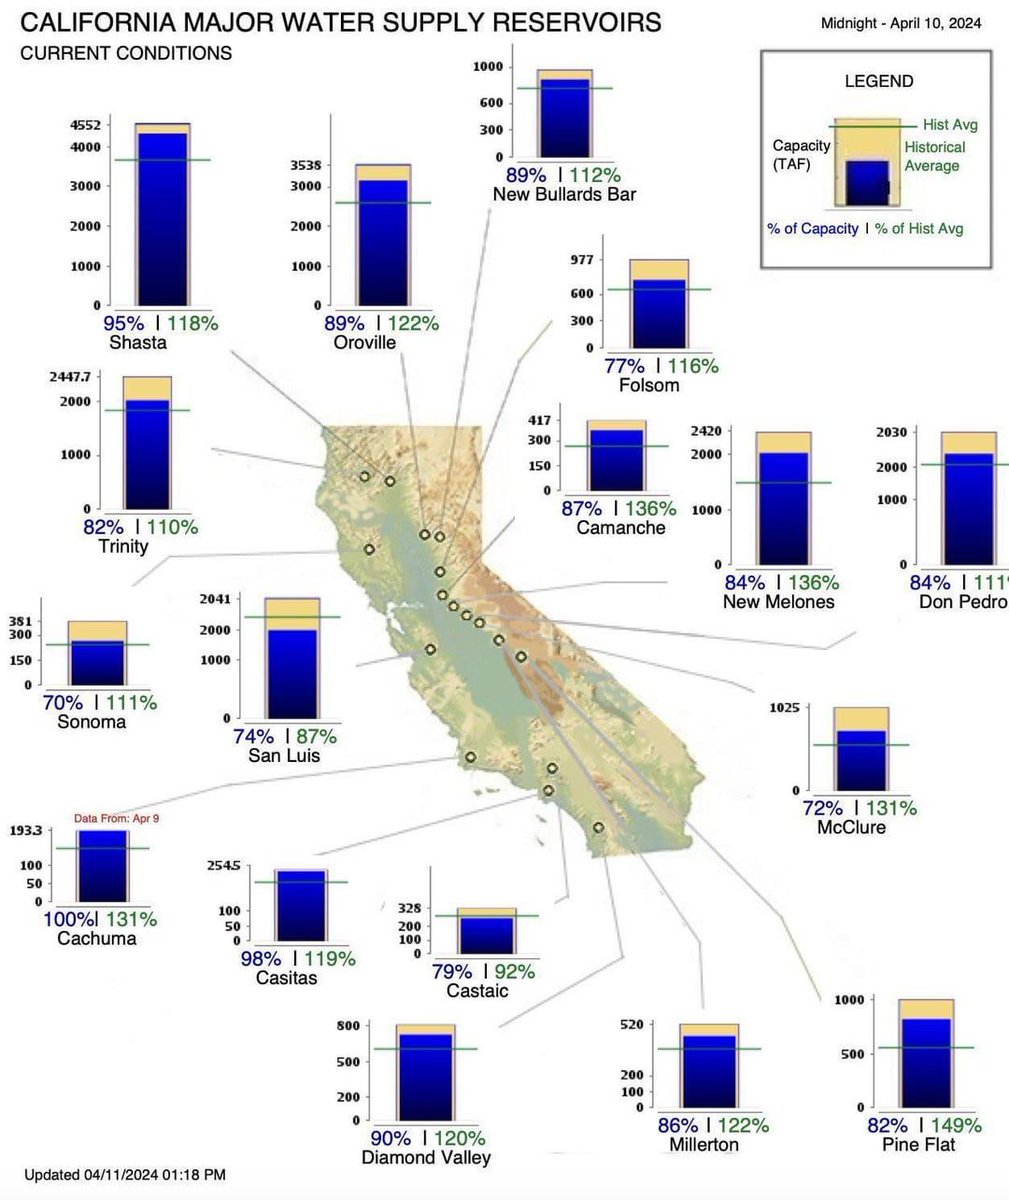 Some good news out of California. The state's water storage is at its healthiest levels in over a decade. Source: buff.ly/49ArCT9